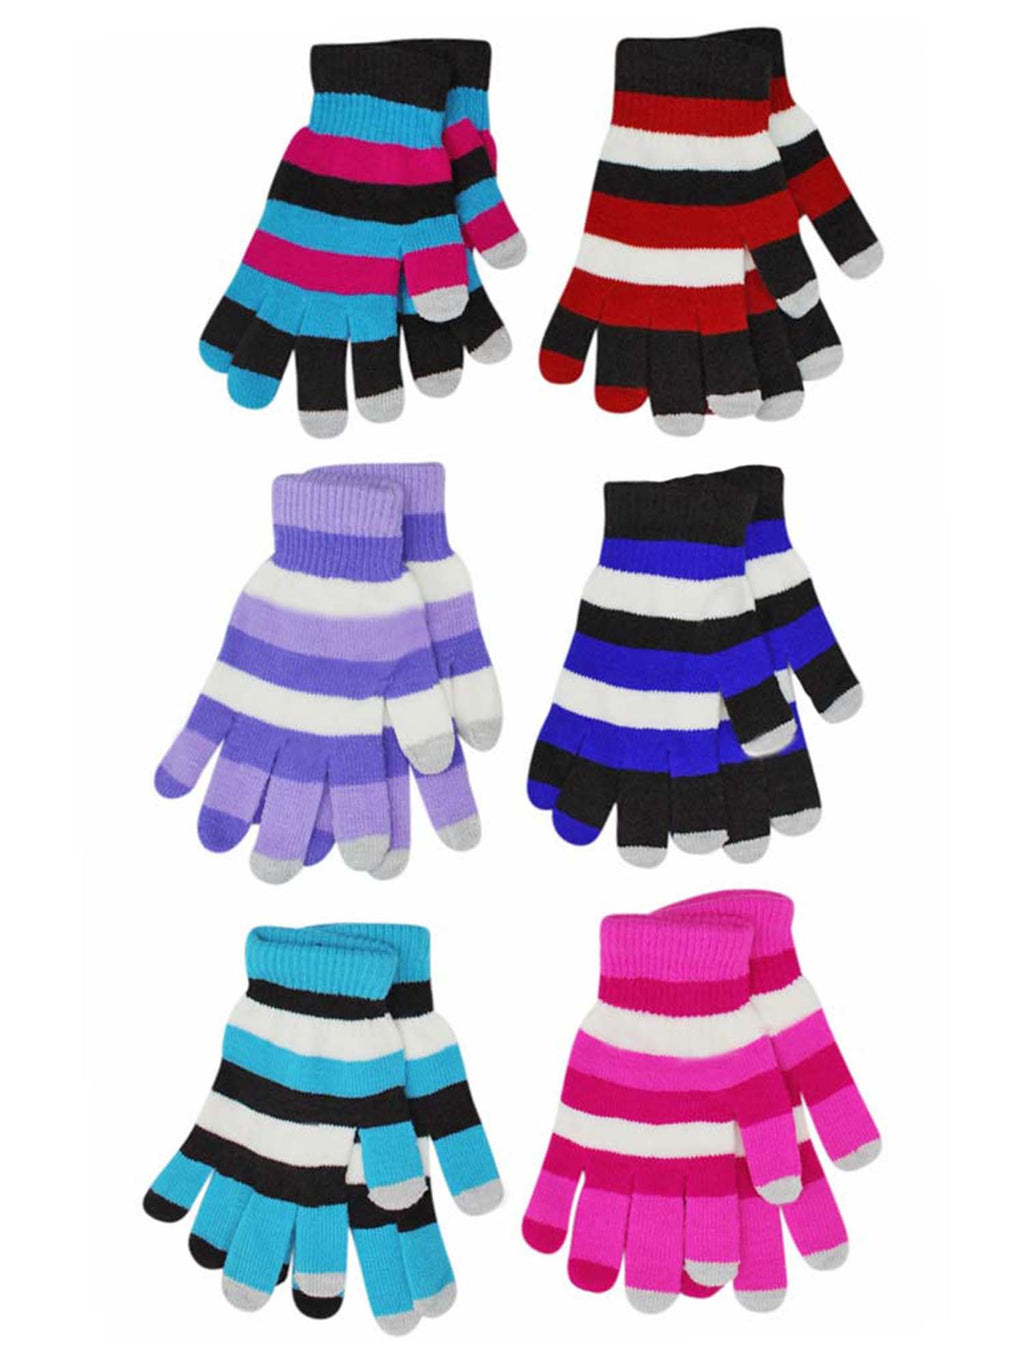 Multicolor Stripe Stretchy 6 Pack Womens Texting Gloves